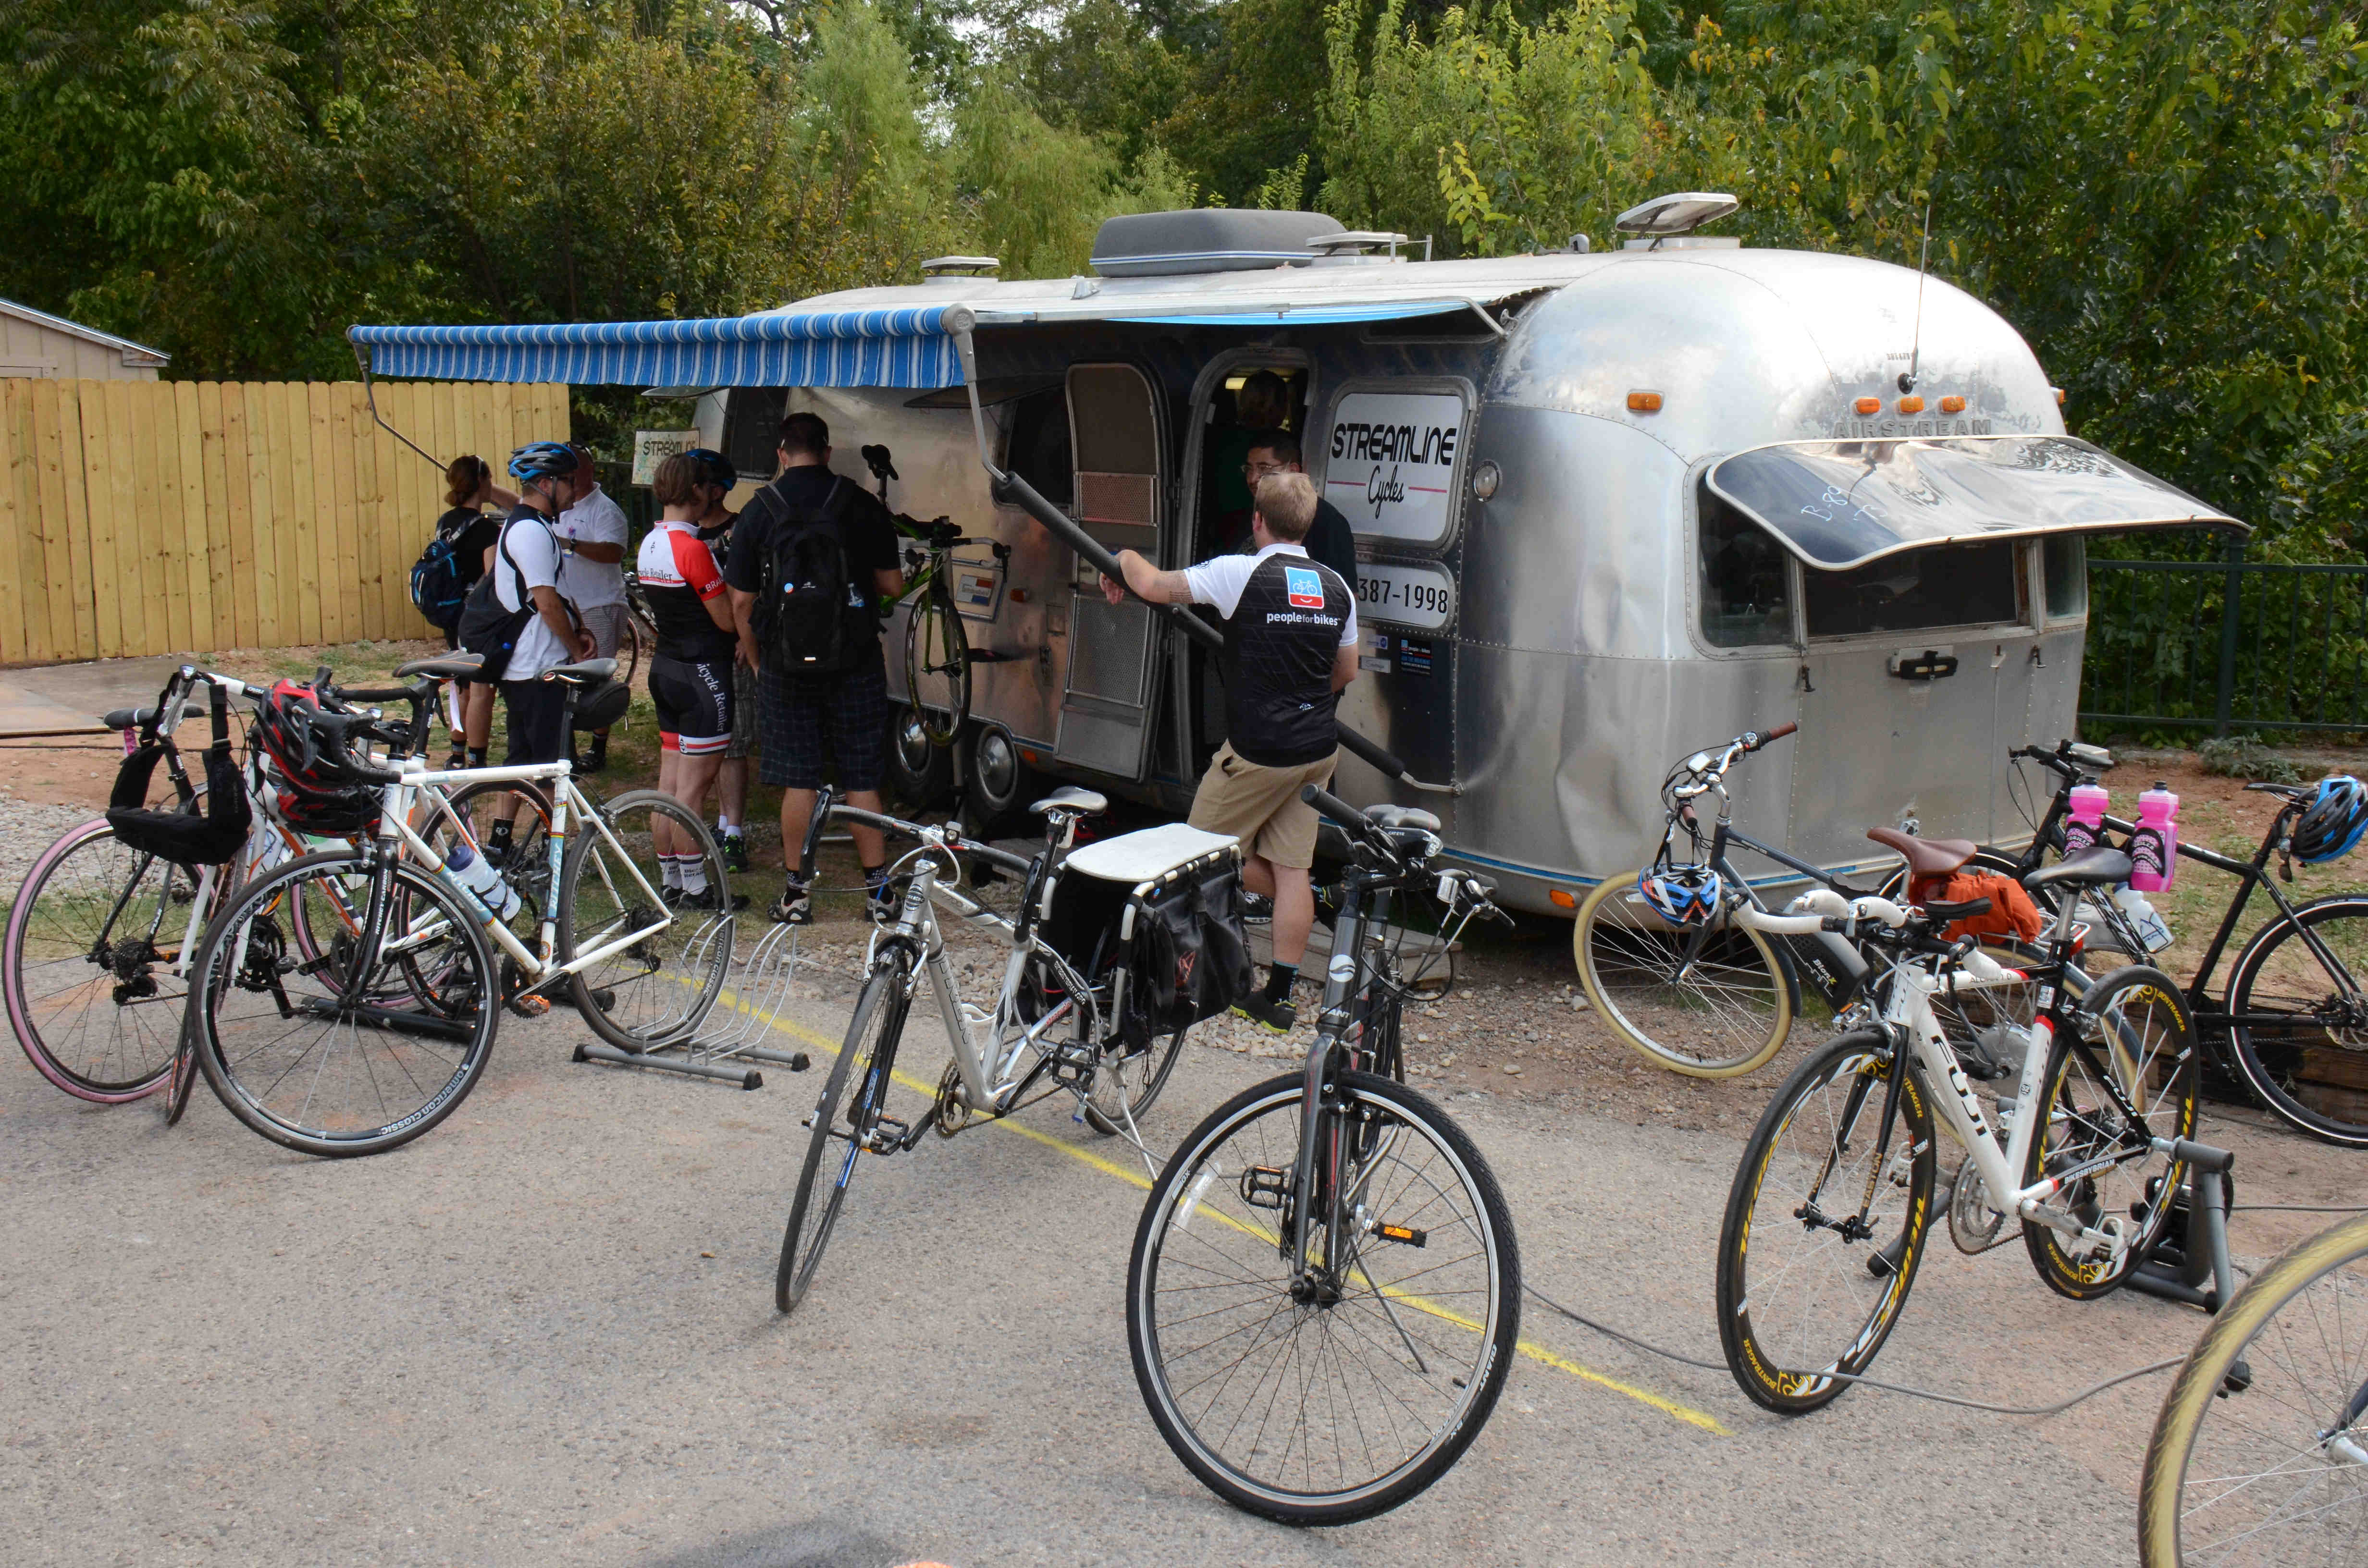 Set up in 262 square feet inside an Airstream trailer, Streamline Cycles is Austin’s smallest bike shop. Owner Jesse Tonche partnered on the service-only shop with Brian Robbins, a Chicago industry veteran who has worked with Chris Kegel at Wheel & Sprocket and also worked for Bicycle Sport Shop and other Austin retailers. They invested about 0,000 to get the business up and running. They bought the Airstream on Craigslist remodeled the trailer and parked it by a food stand.